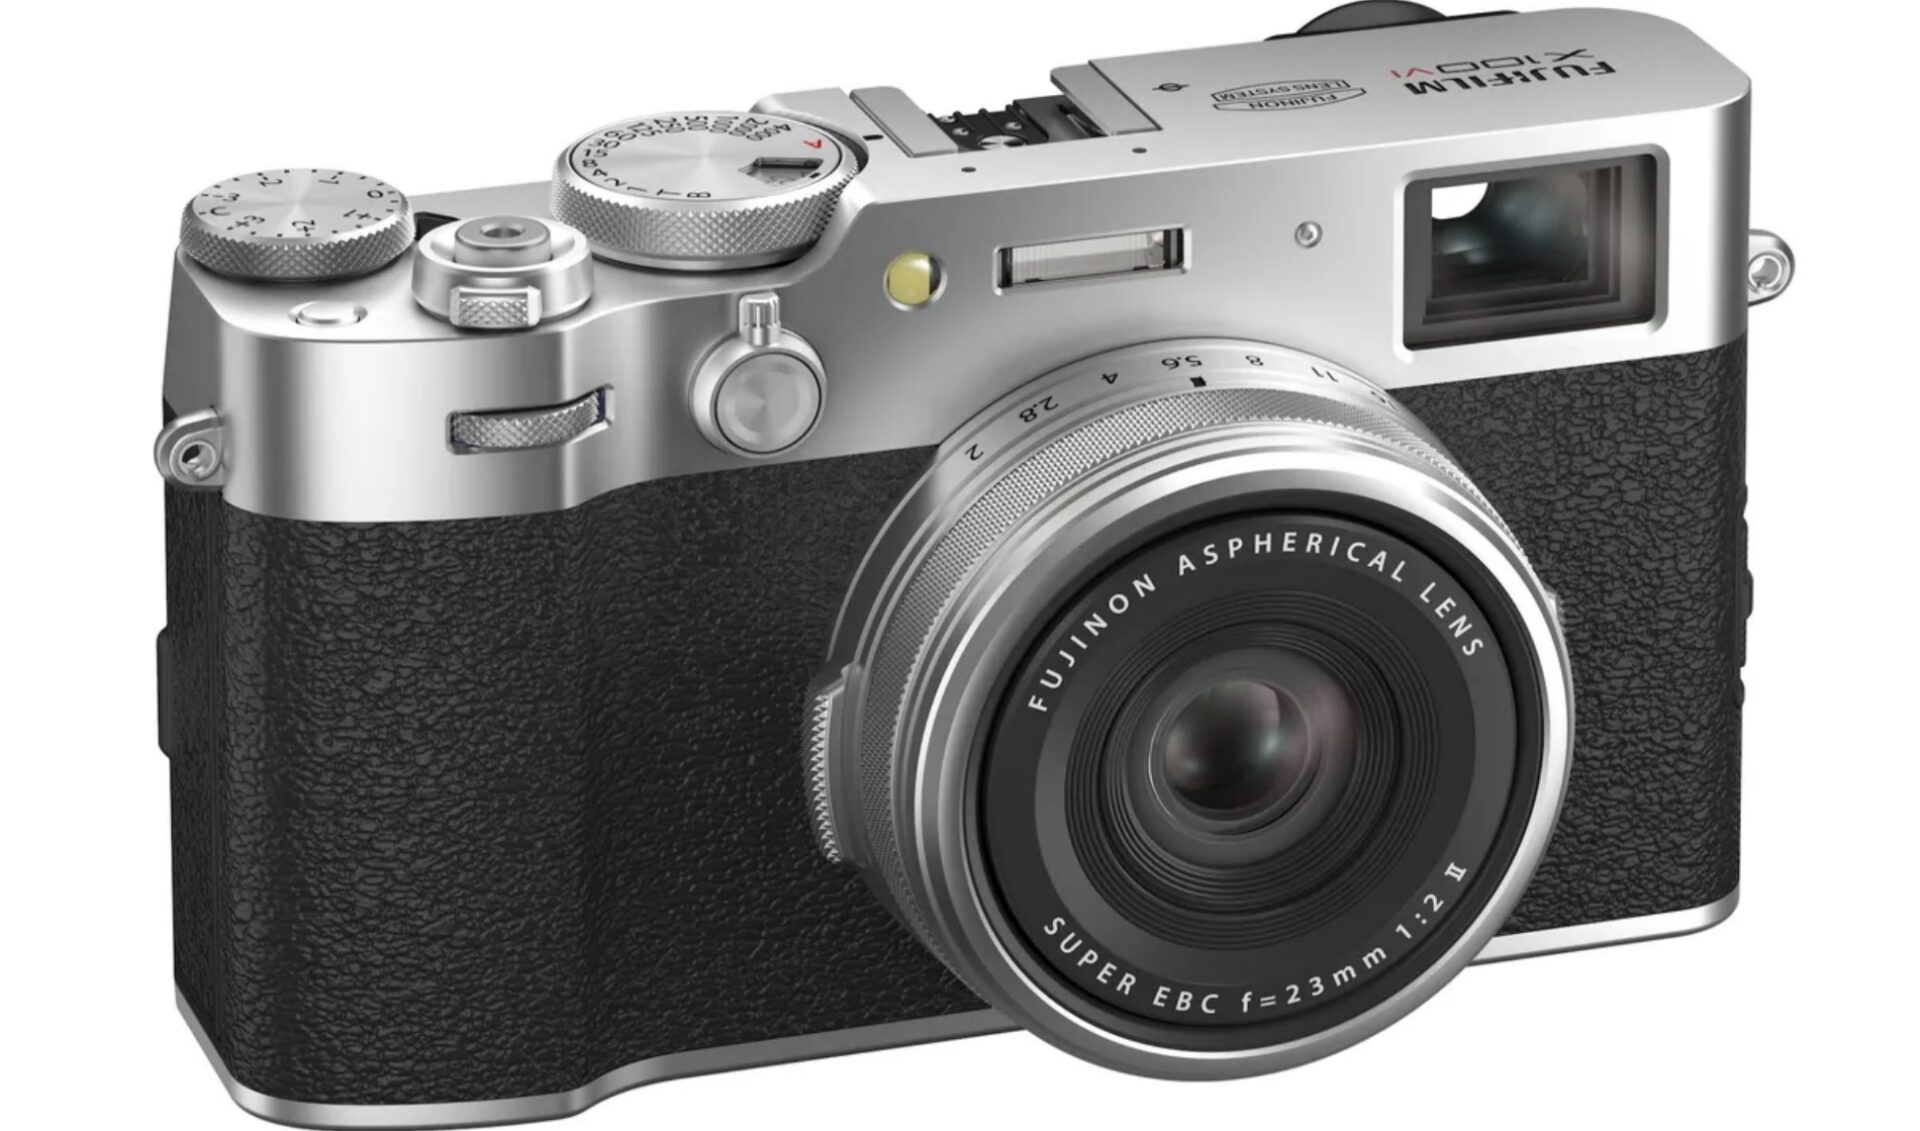 Fujifilm’s X100V got so big on TikTok that it sold out. The next camera in that line has arrived.